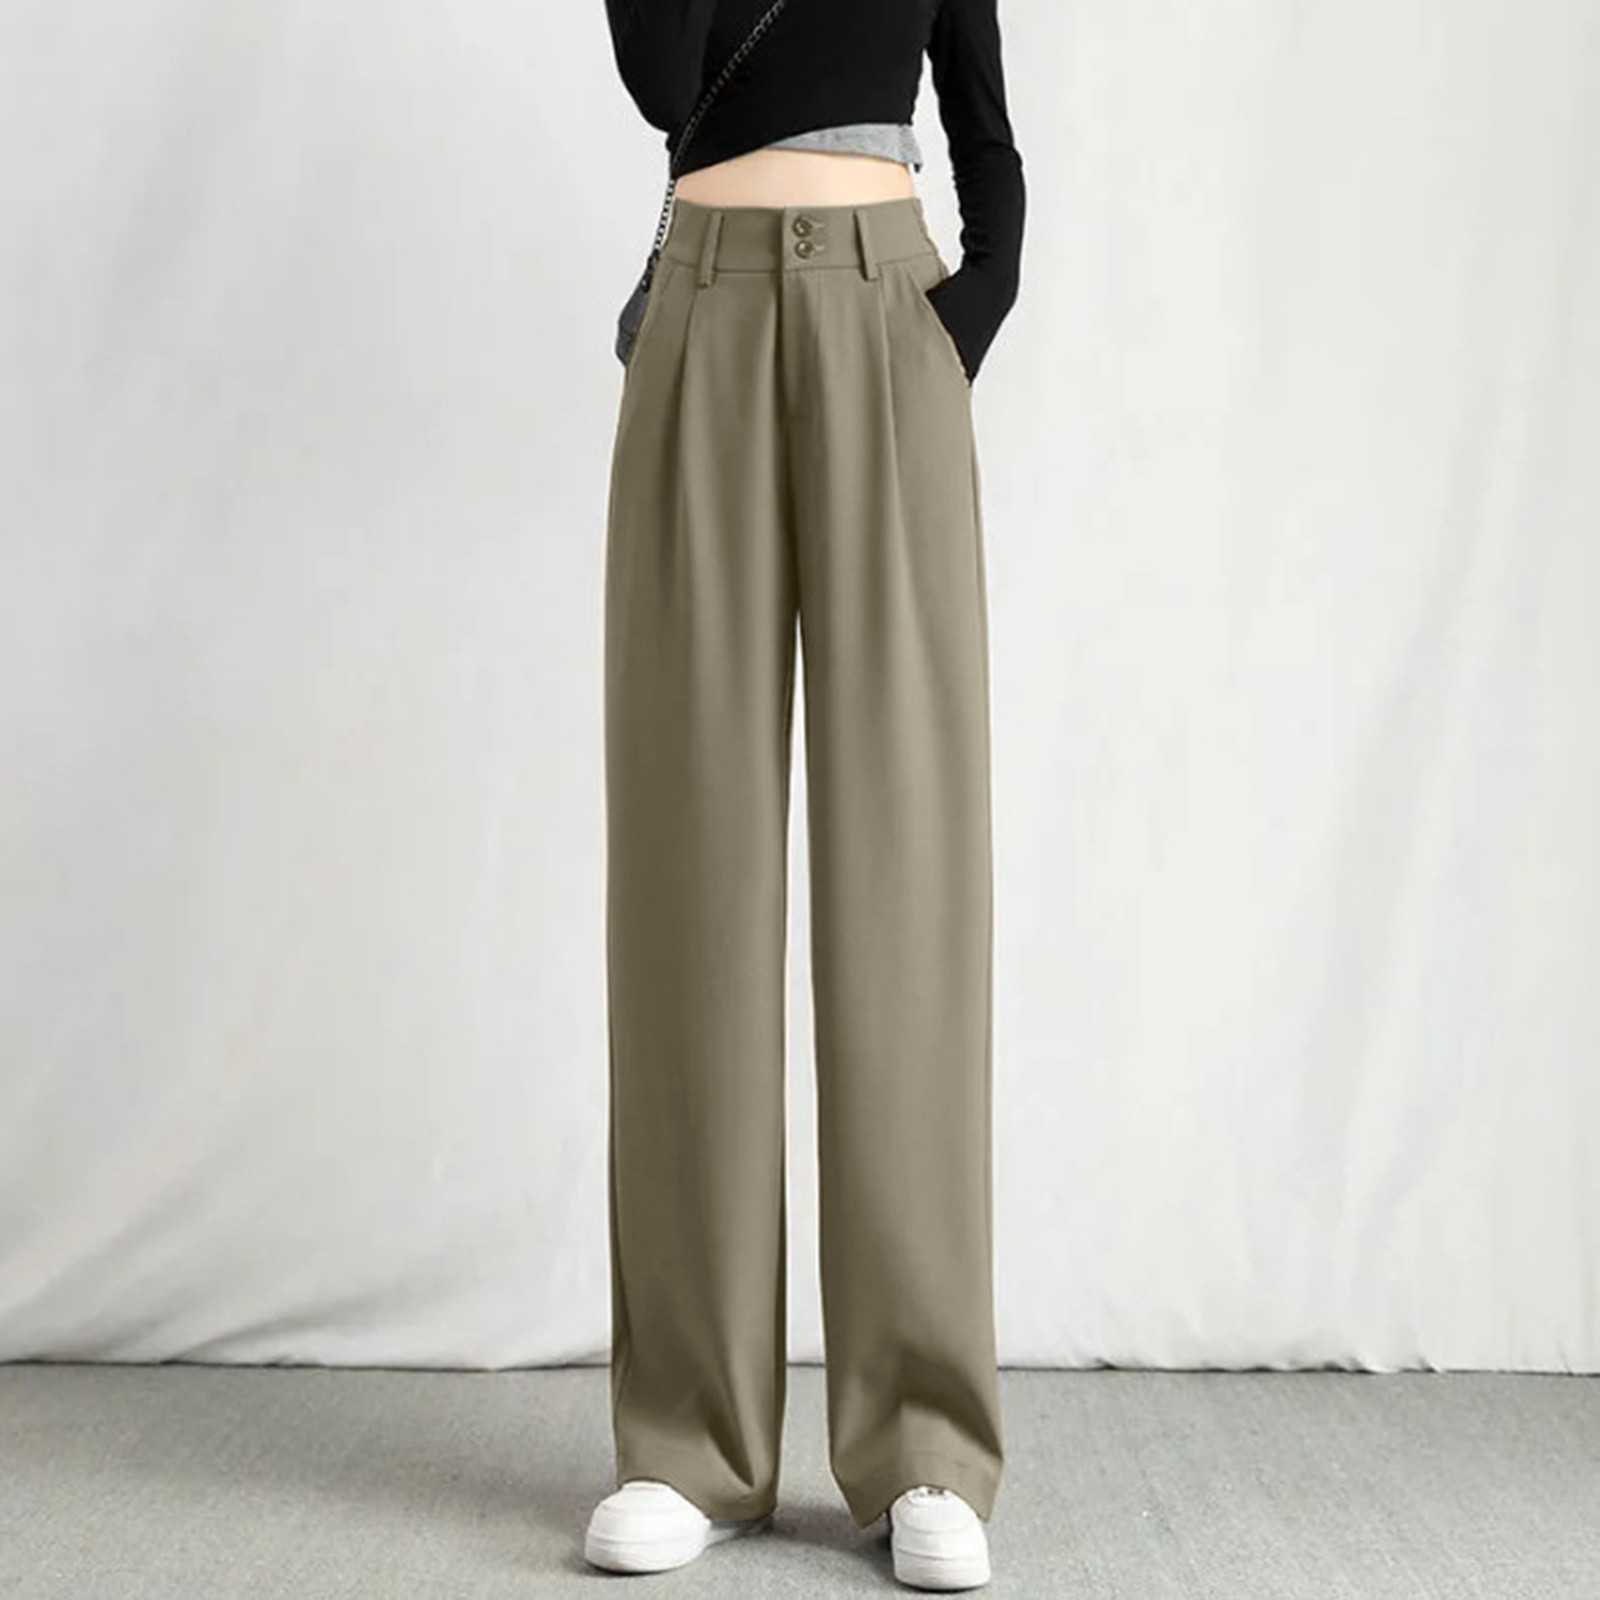 Women's Long Straight Suit Pants Elastic High Waisted In The Back ...